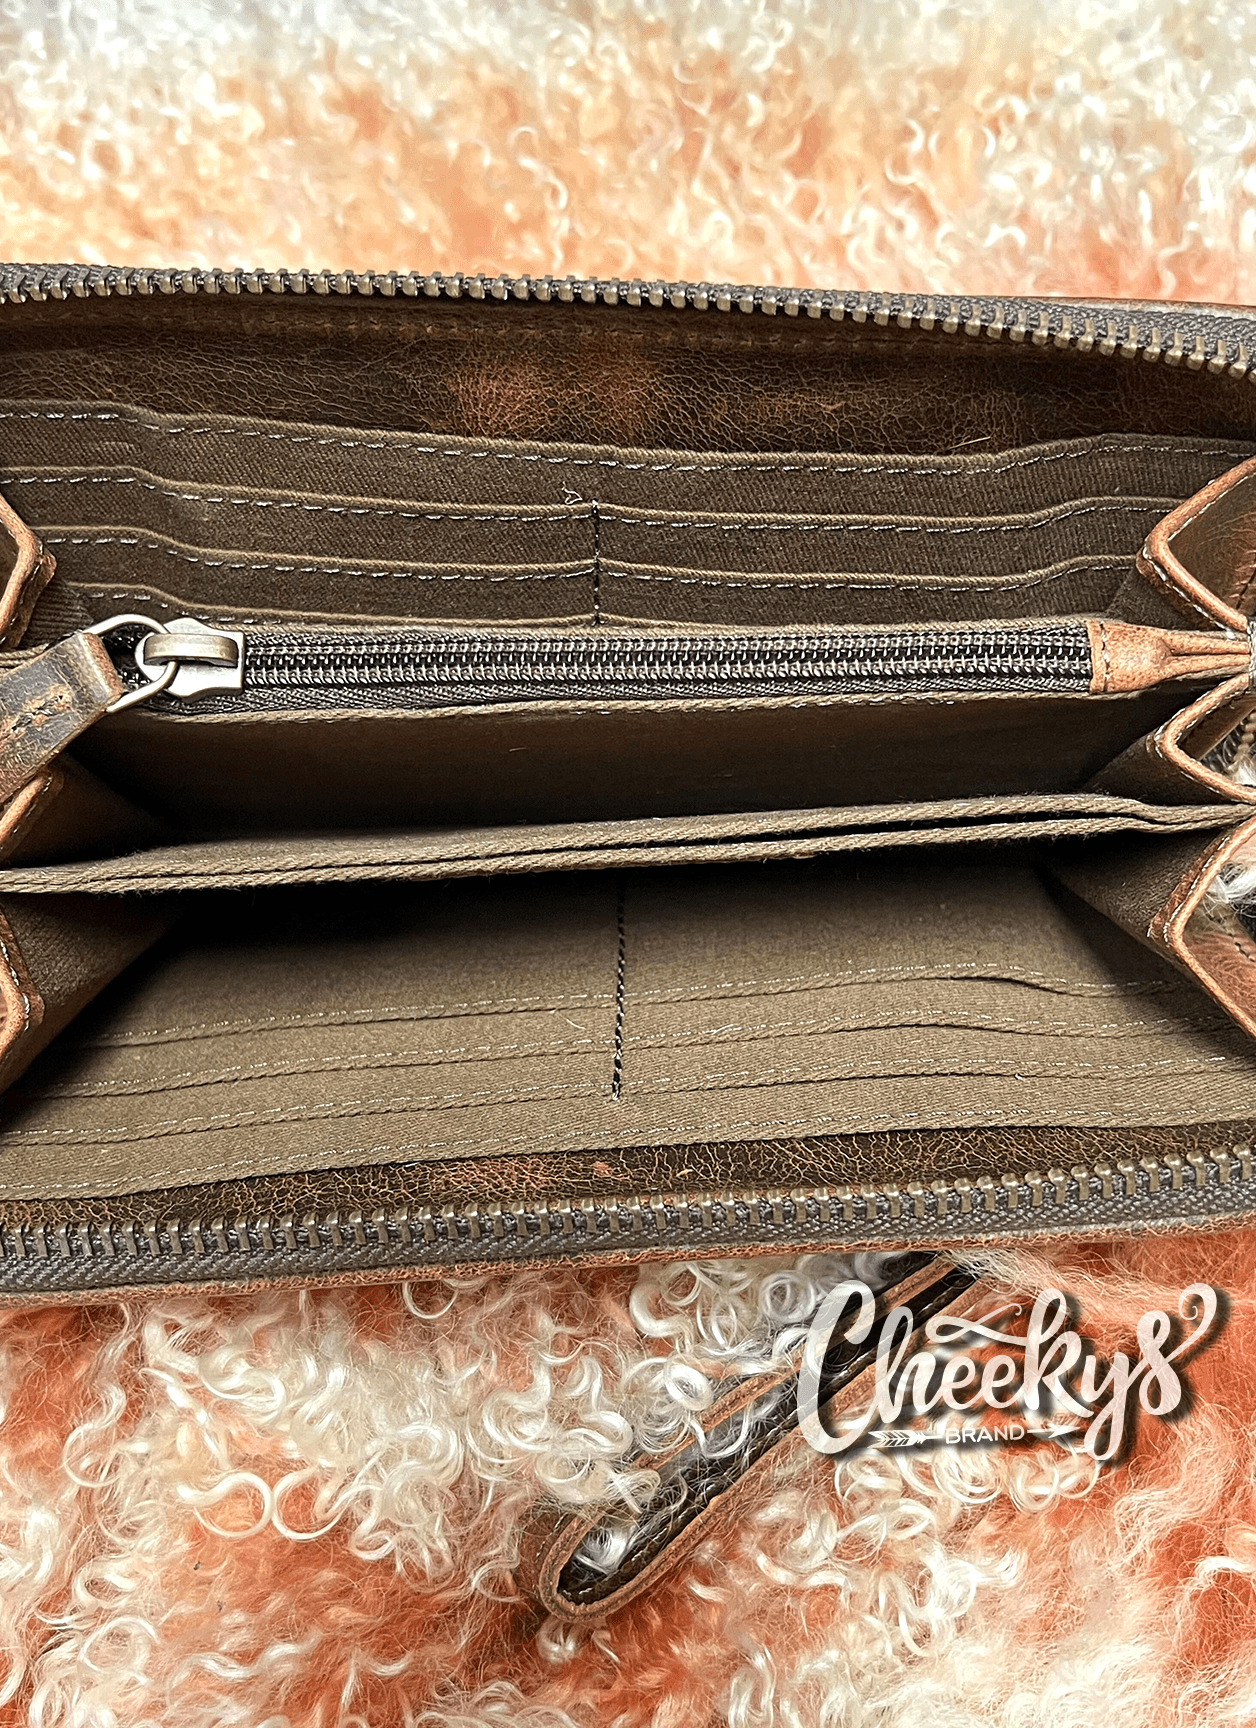 Obray Wallet/Clutch Leather Cheekys Brand 